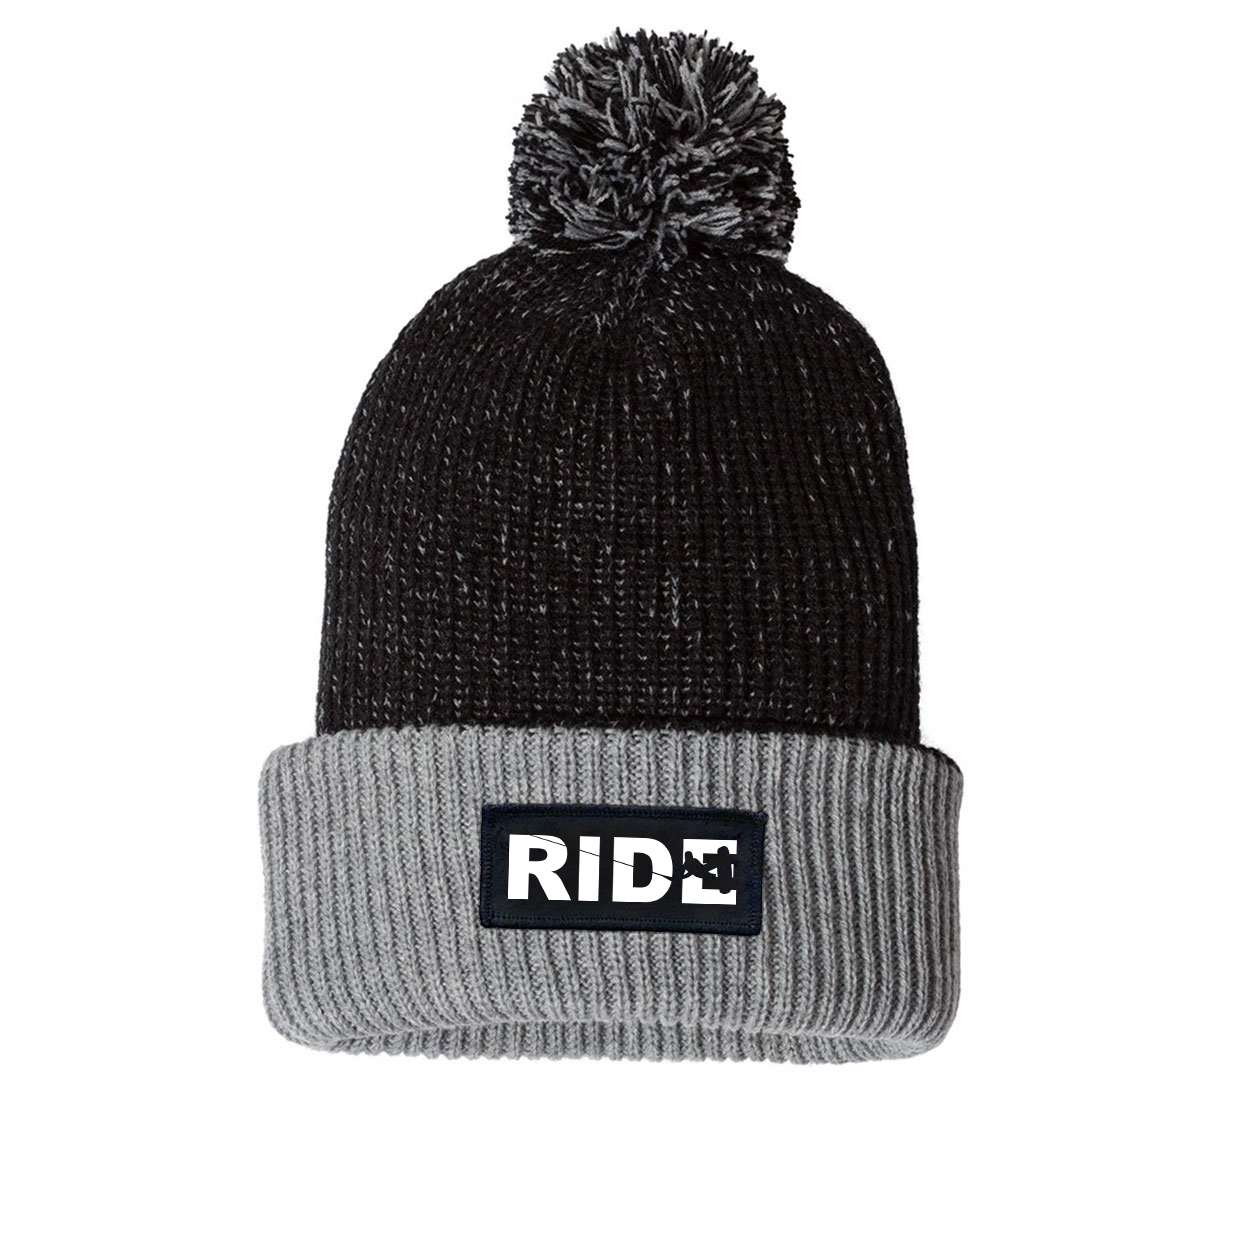 Ride Wakeboard Logo Night Out Woven Patch Roll Up Pom Knit Beanie Black/Gray (White Logo)